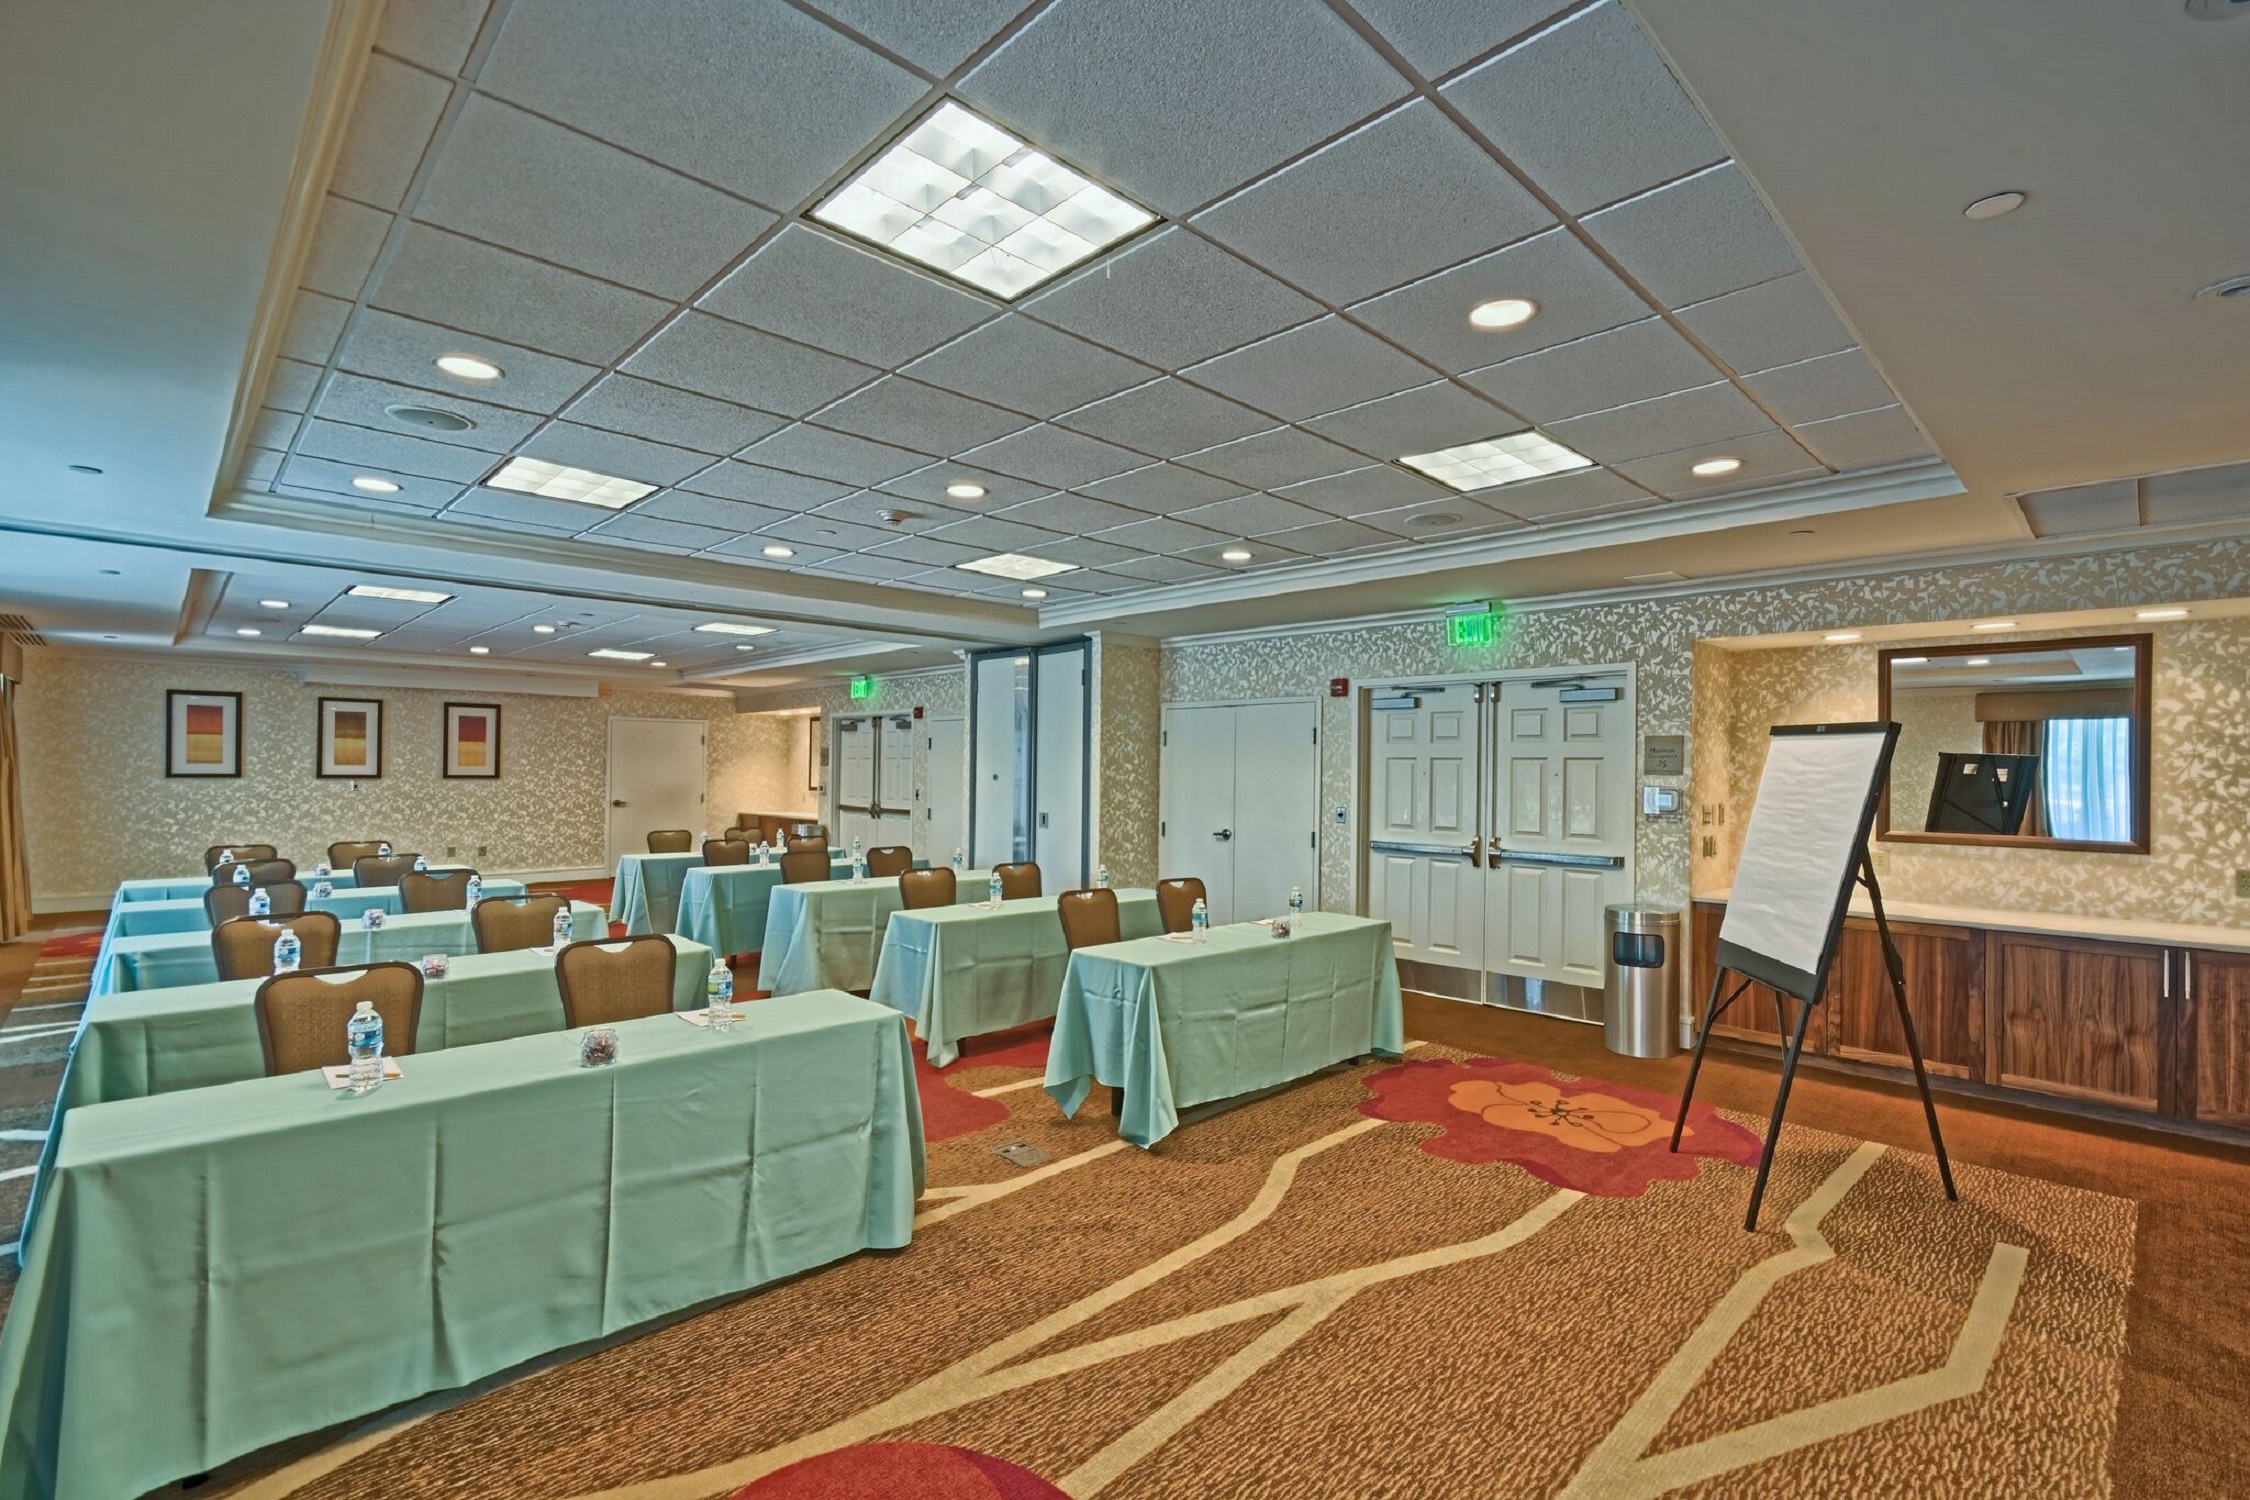 Classroom-Style Meeting Space